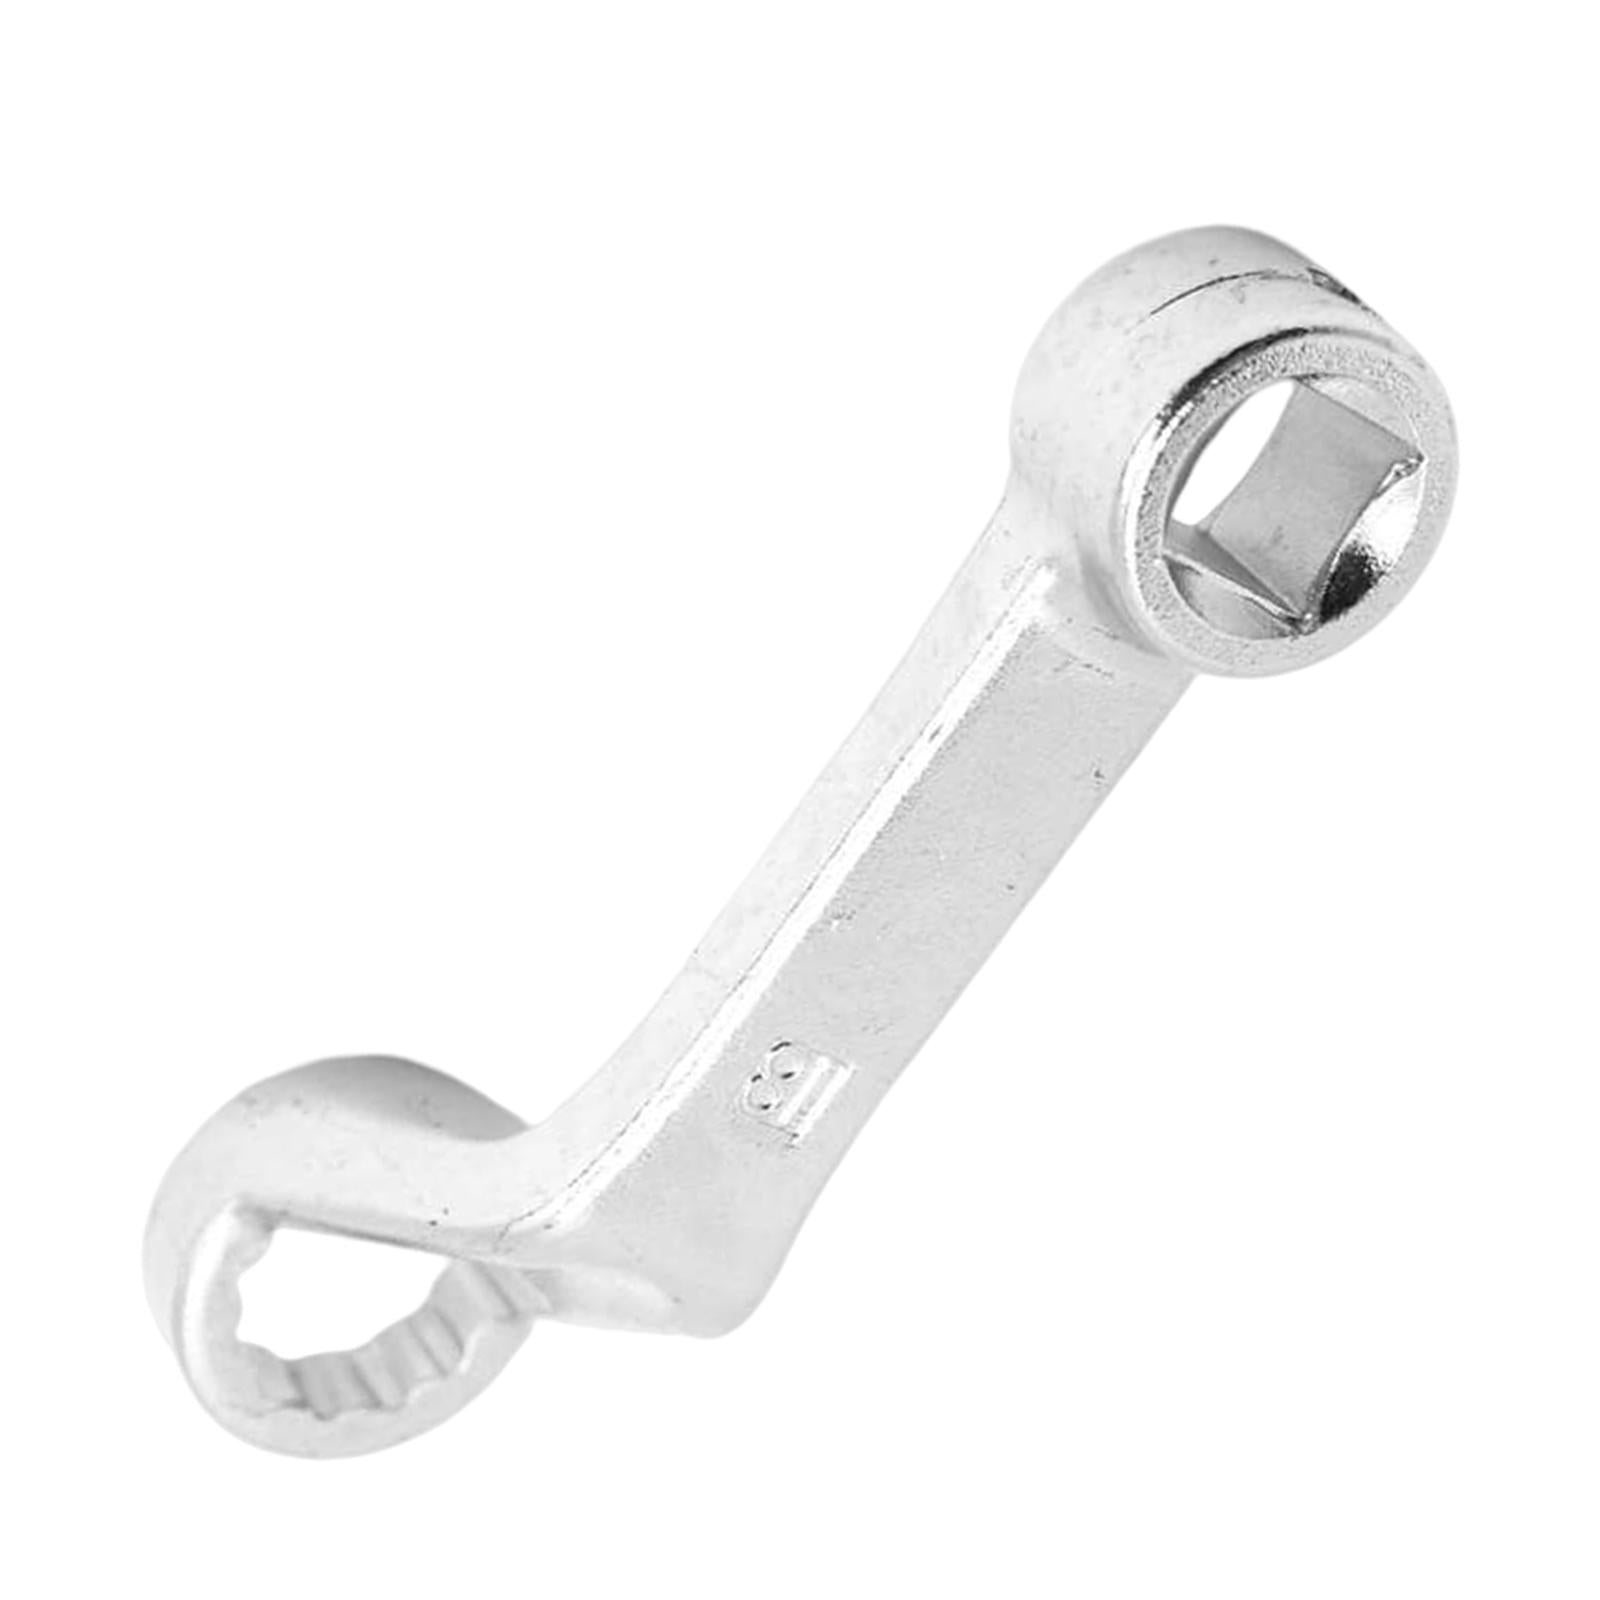 18mm Camber Adjusting Wrench T10179 for Car Repair Portable Durable Steel